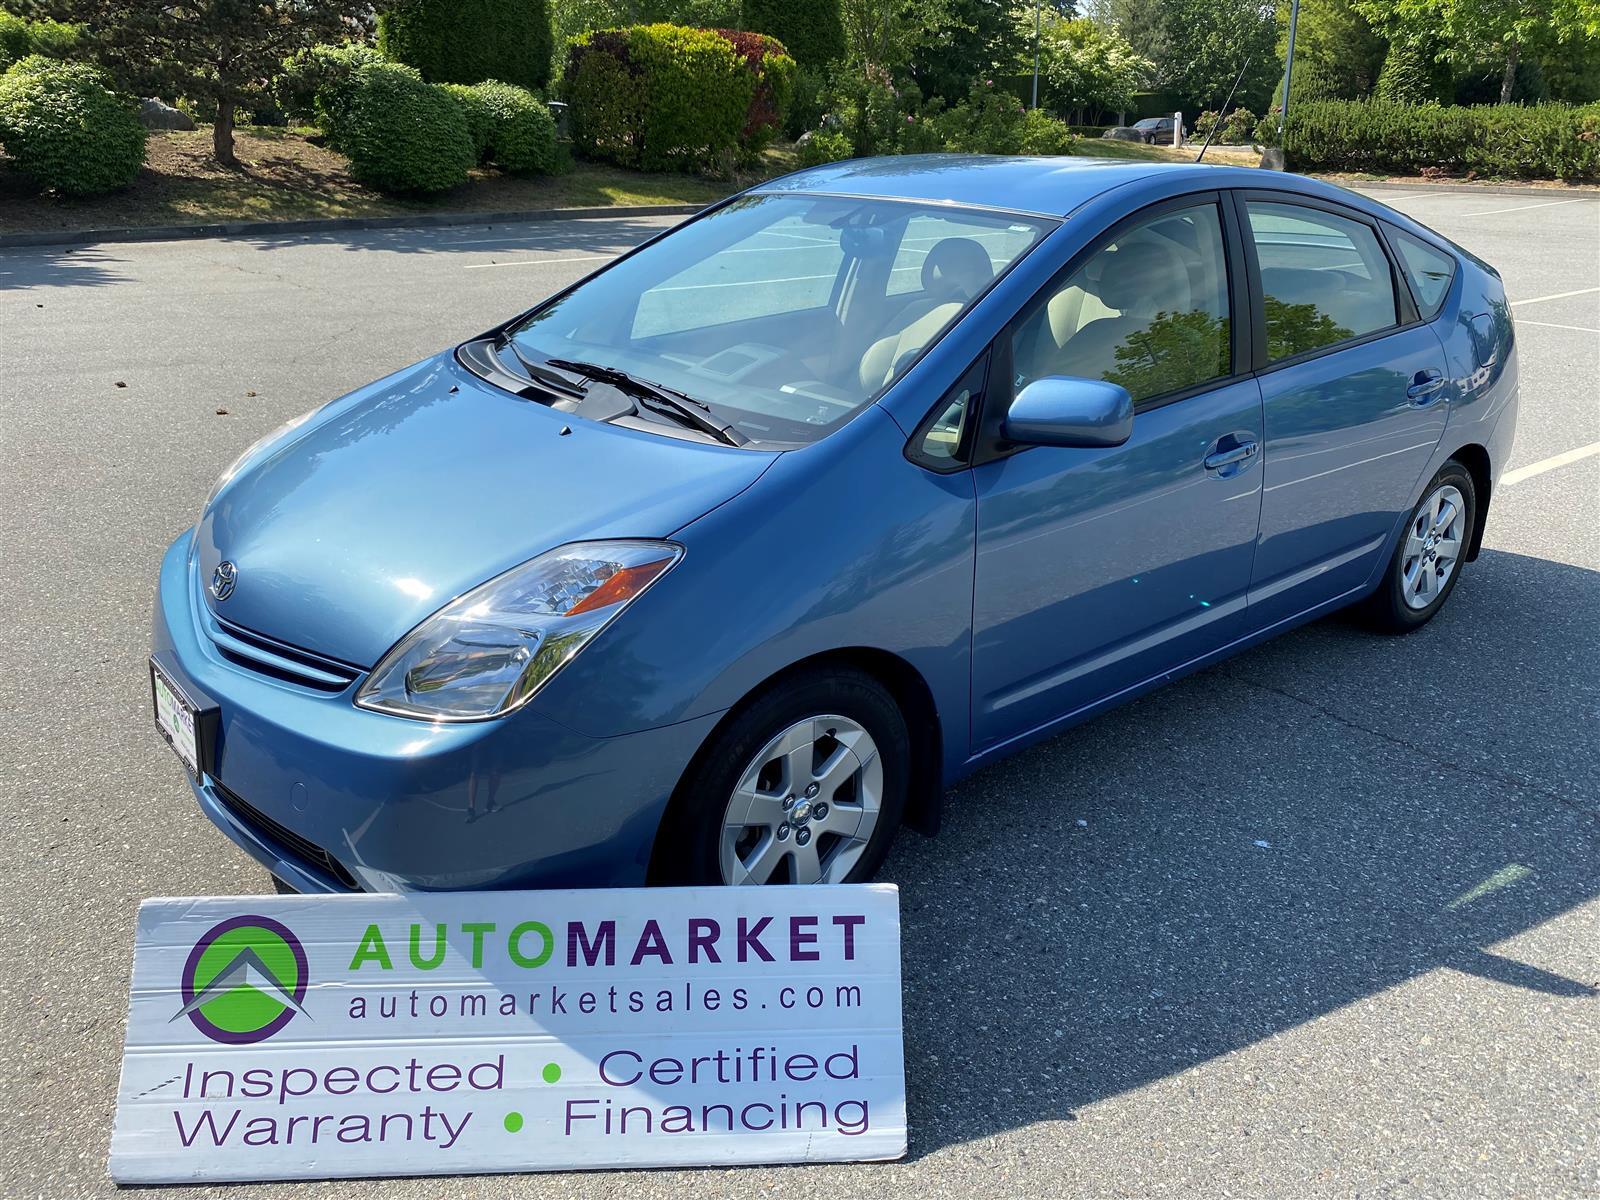 2005 Toyota Prius NEW CONDITION, LOW KM, INSPECTED, WARRANTY, FINANC